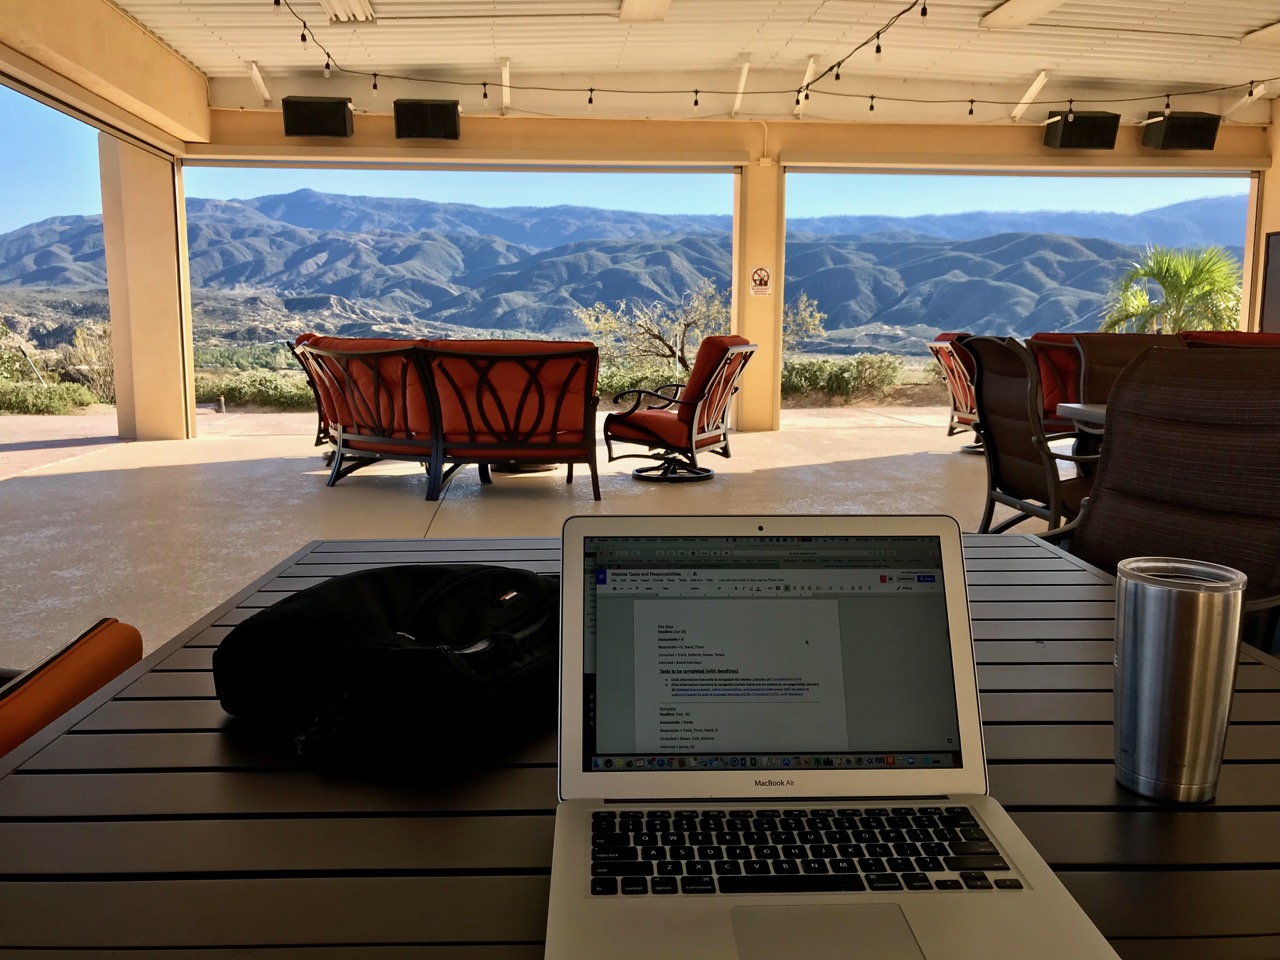 Working on the deck overlooking the mountains at Jojoba Hills SKP Co-Op, Aguanga, CA (DG photo)